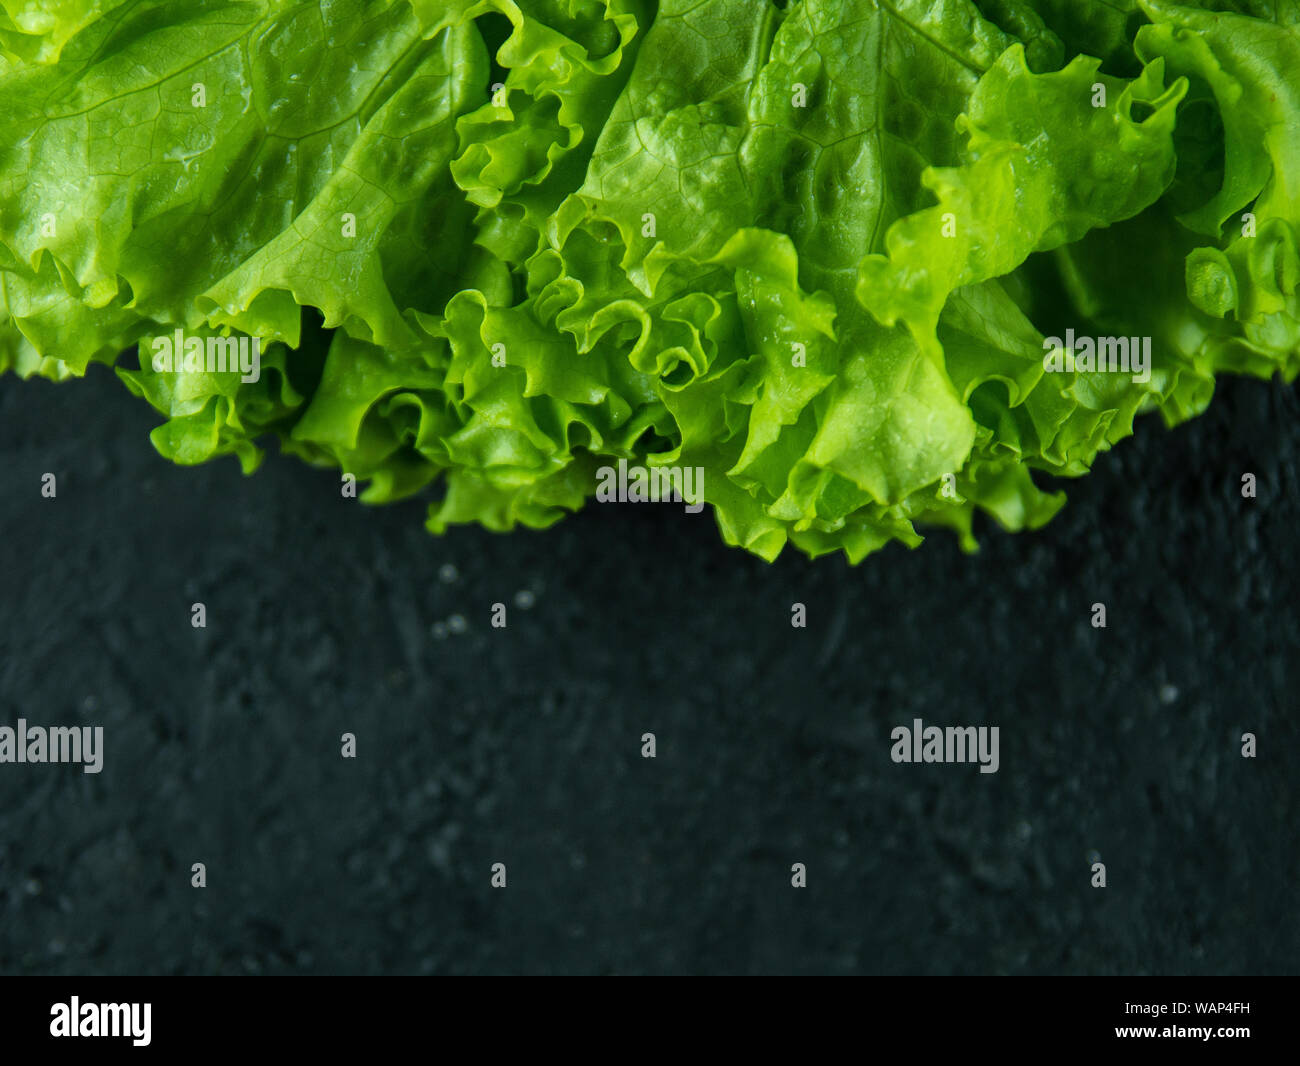 Leaves of fresh lettuce on a stone background. Top view Stock Photo